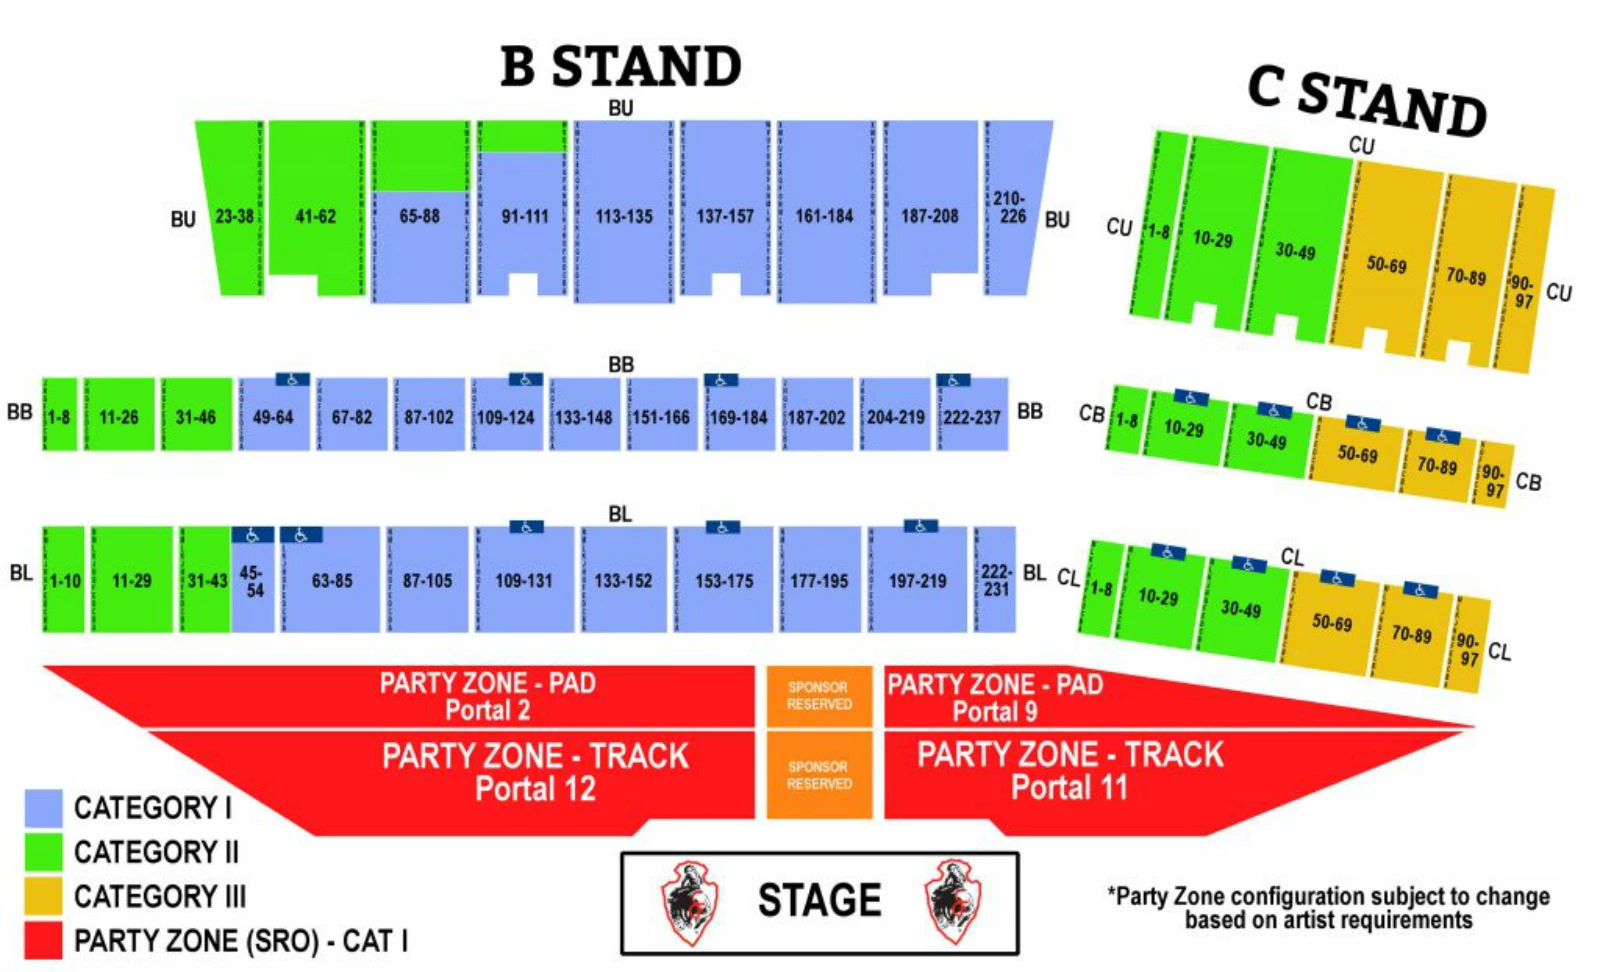 Cheyenne Frontier Days Rodeo Seating Chart